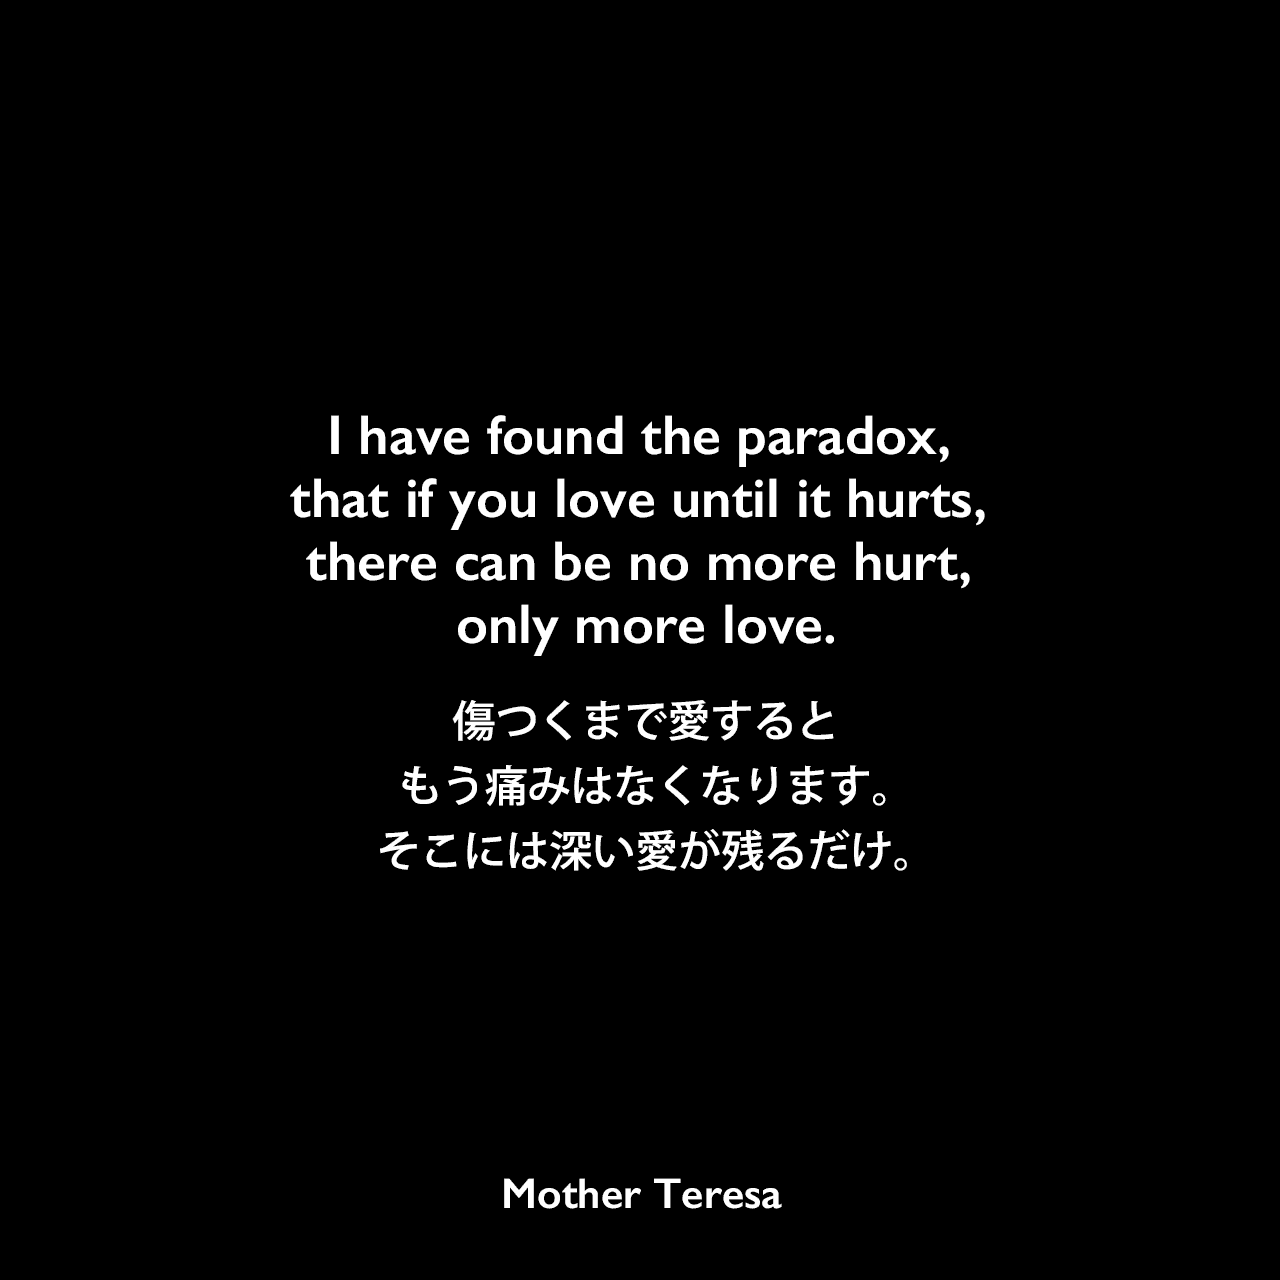 I have found the paradox, that if you love until it hurts, there can be no more hurt, only more love.傷つくまで愛するともう痛みはなくなります。そこには深い愛が残るだけ。Mother Teresa